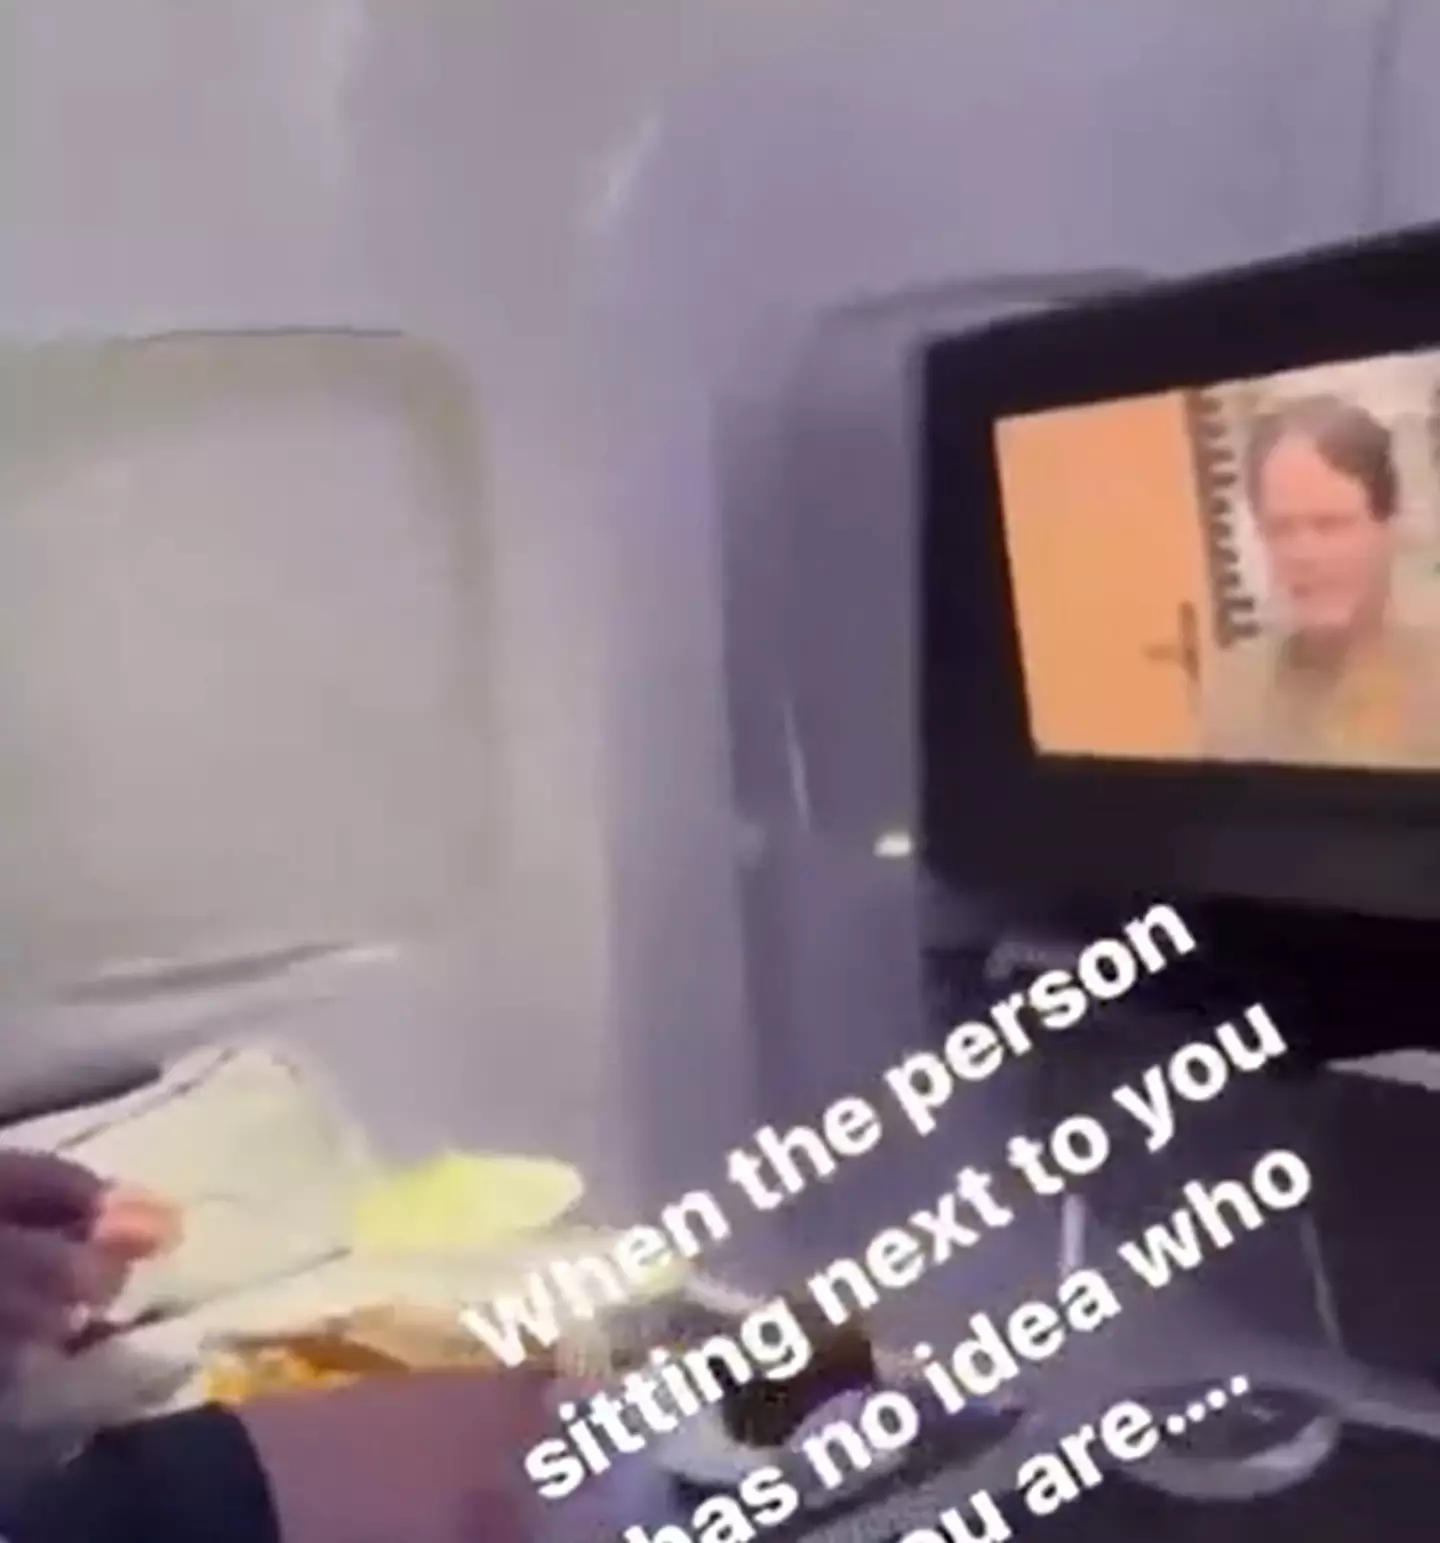 The guy was even watching a part of the show with Dwight on screen.